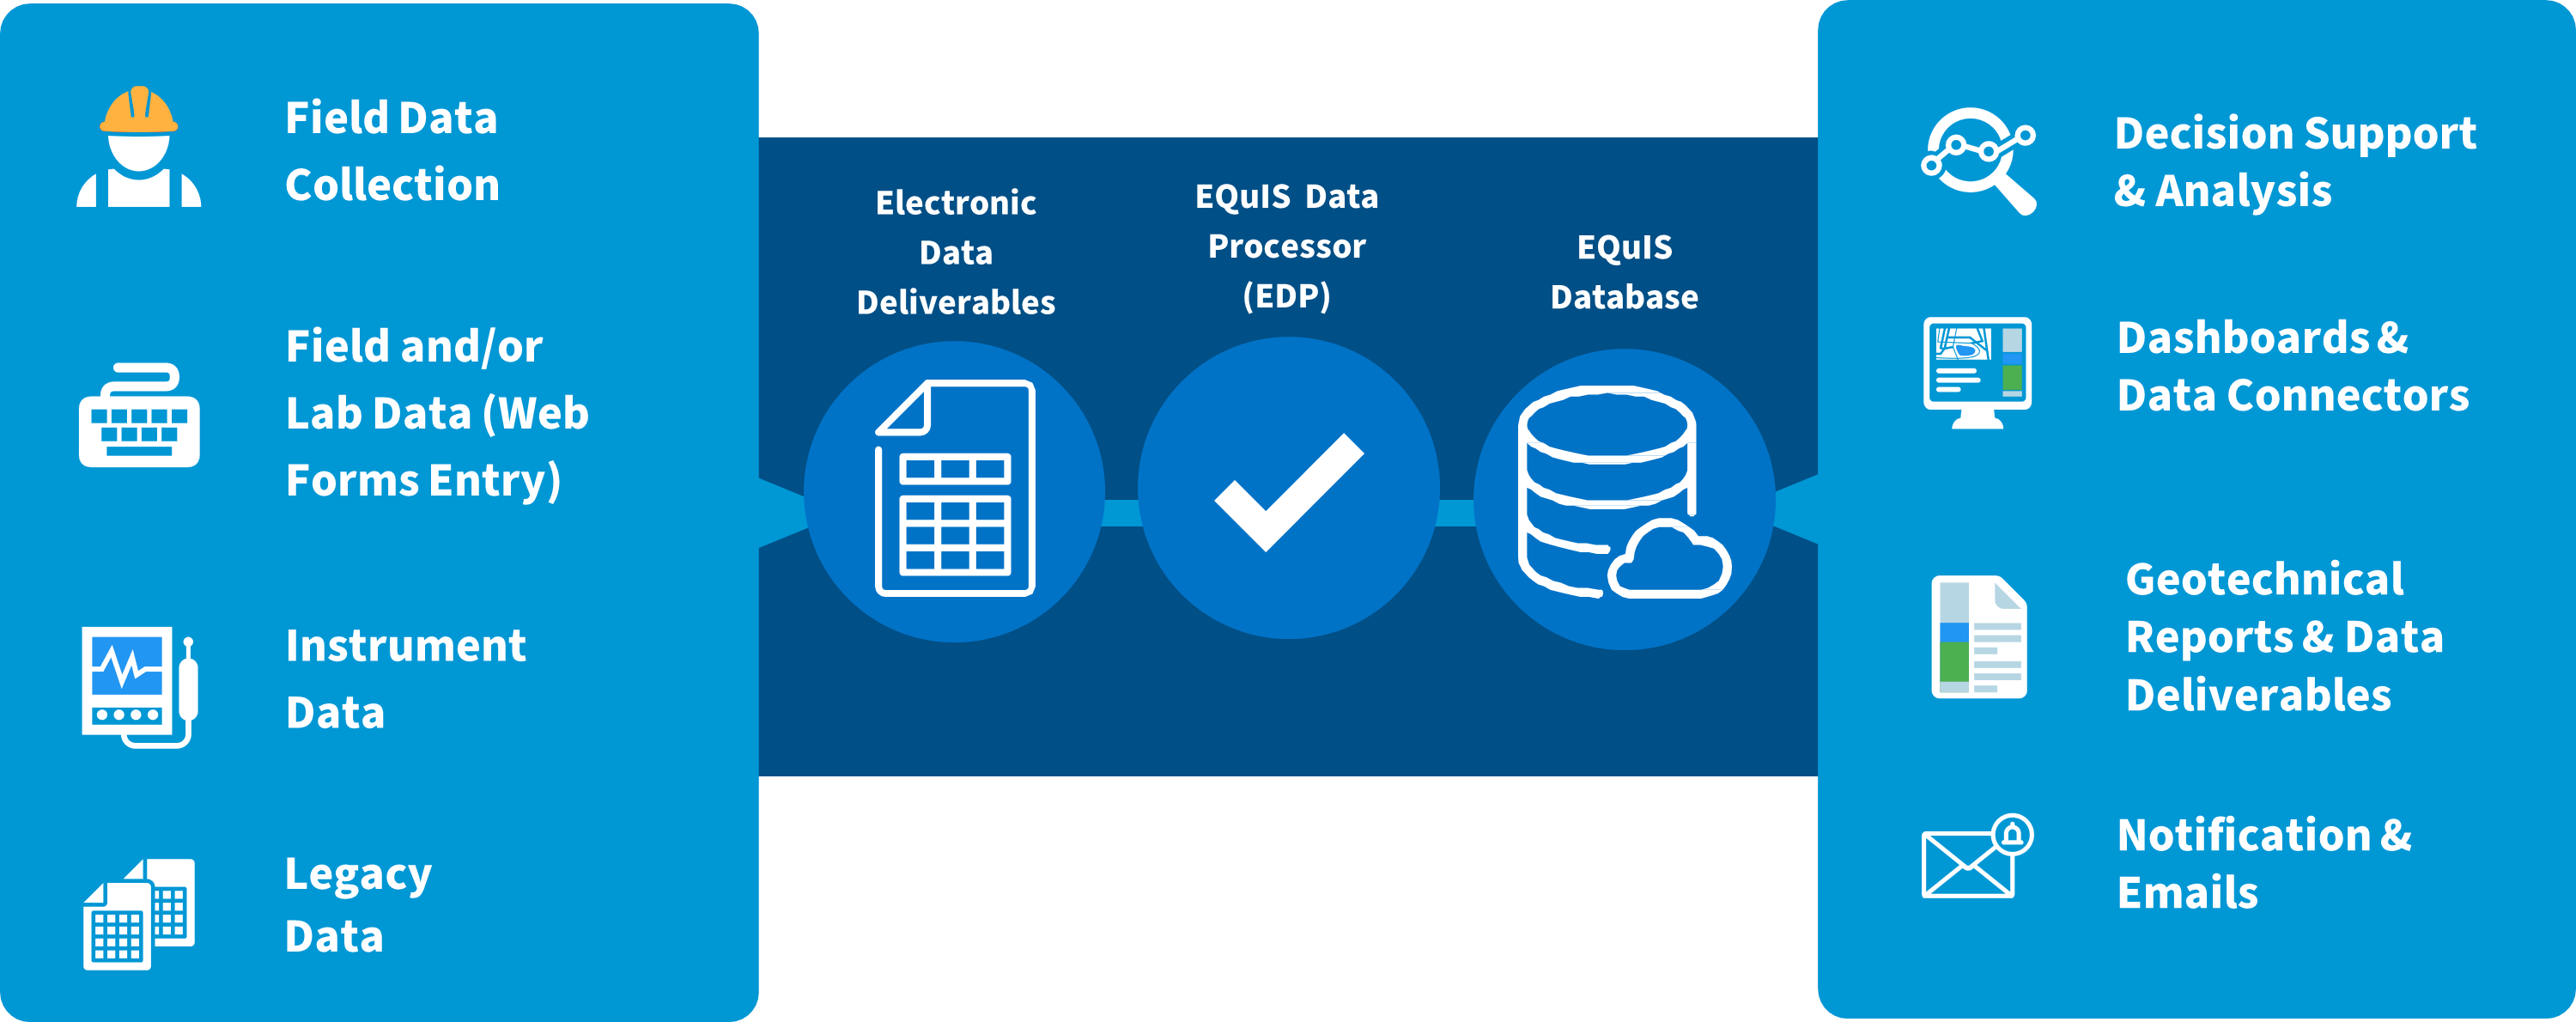 EQuIS Geotech Workflow2